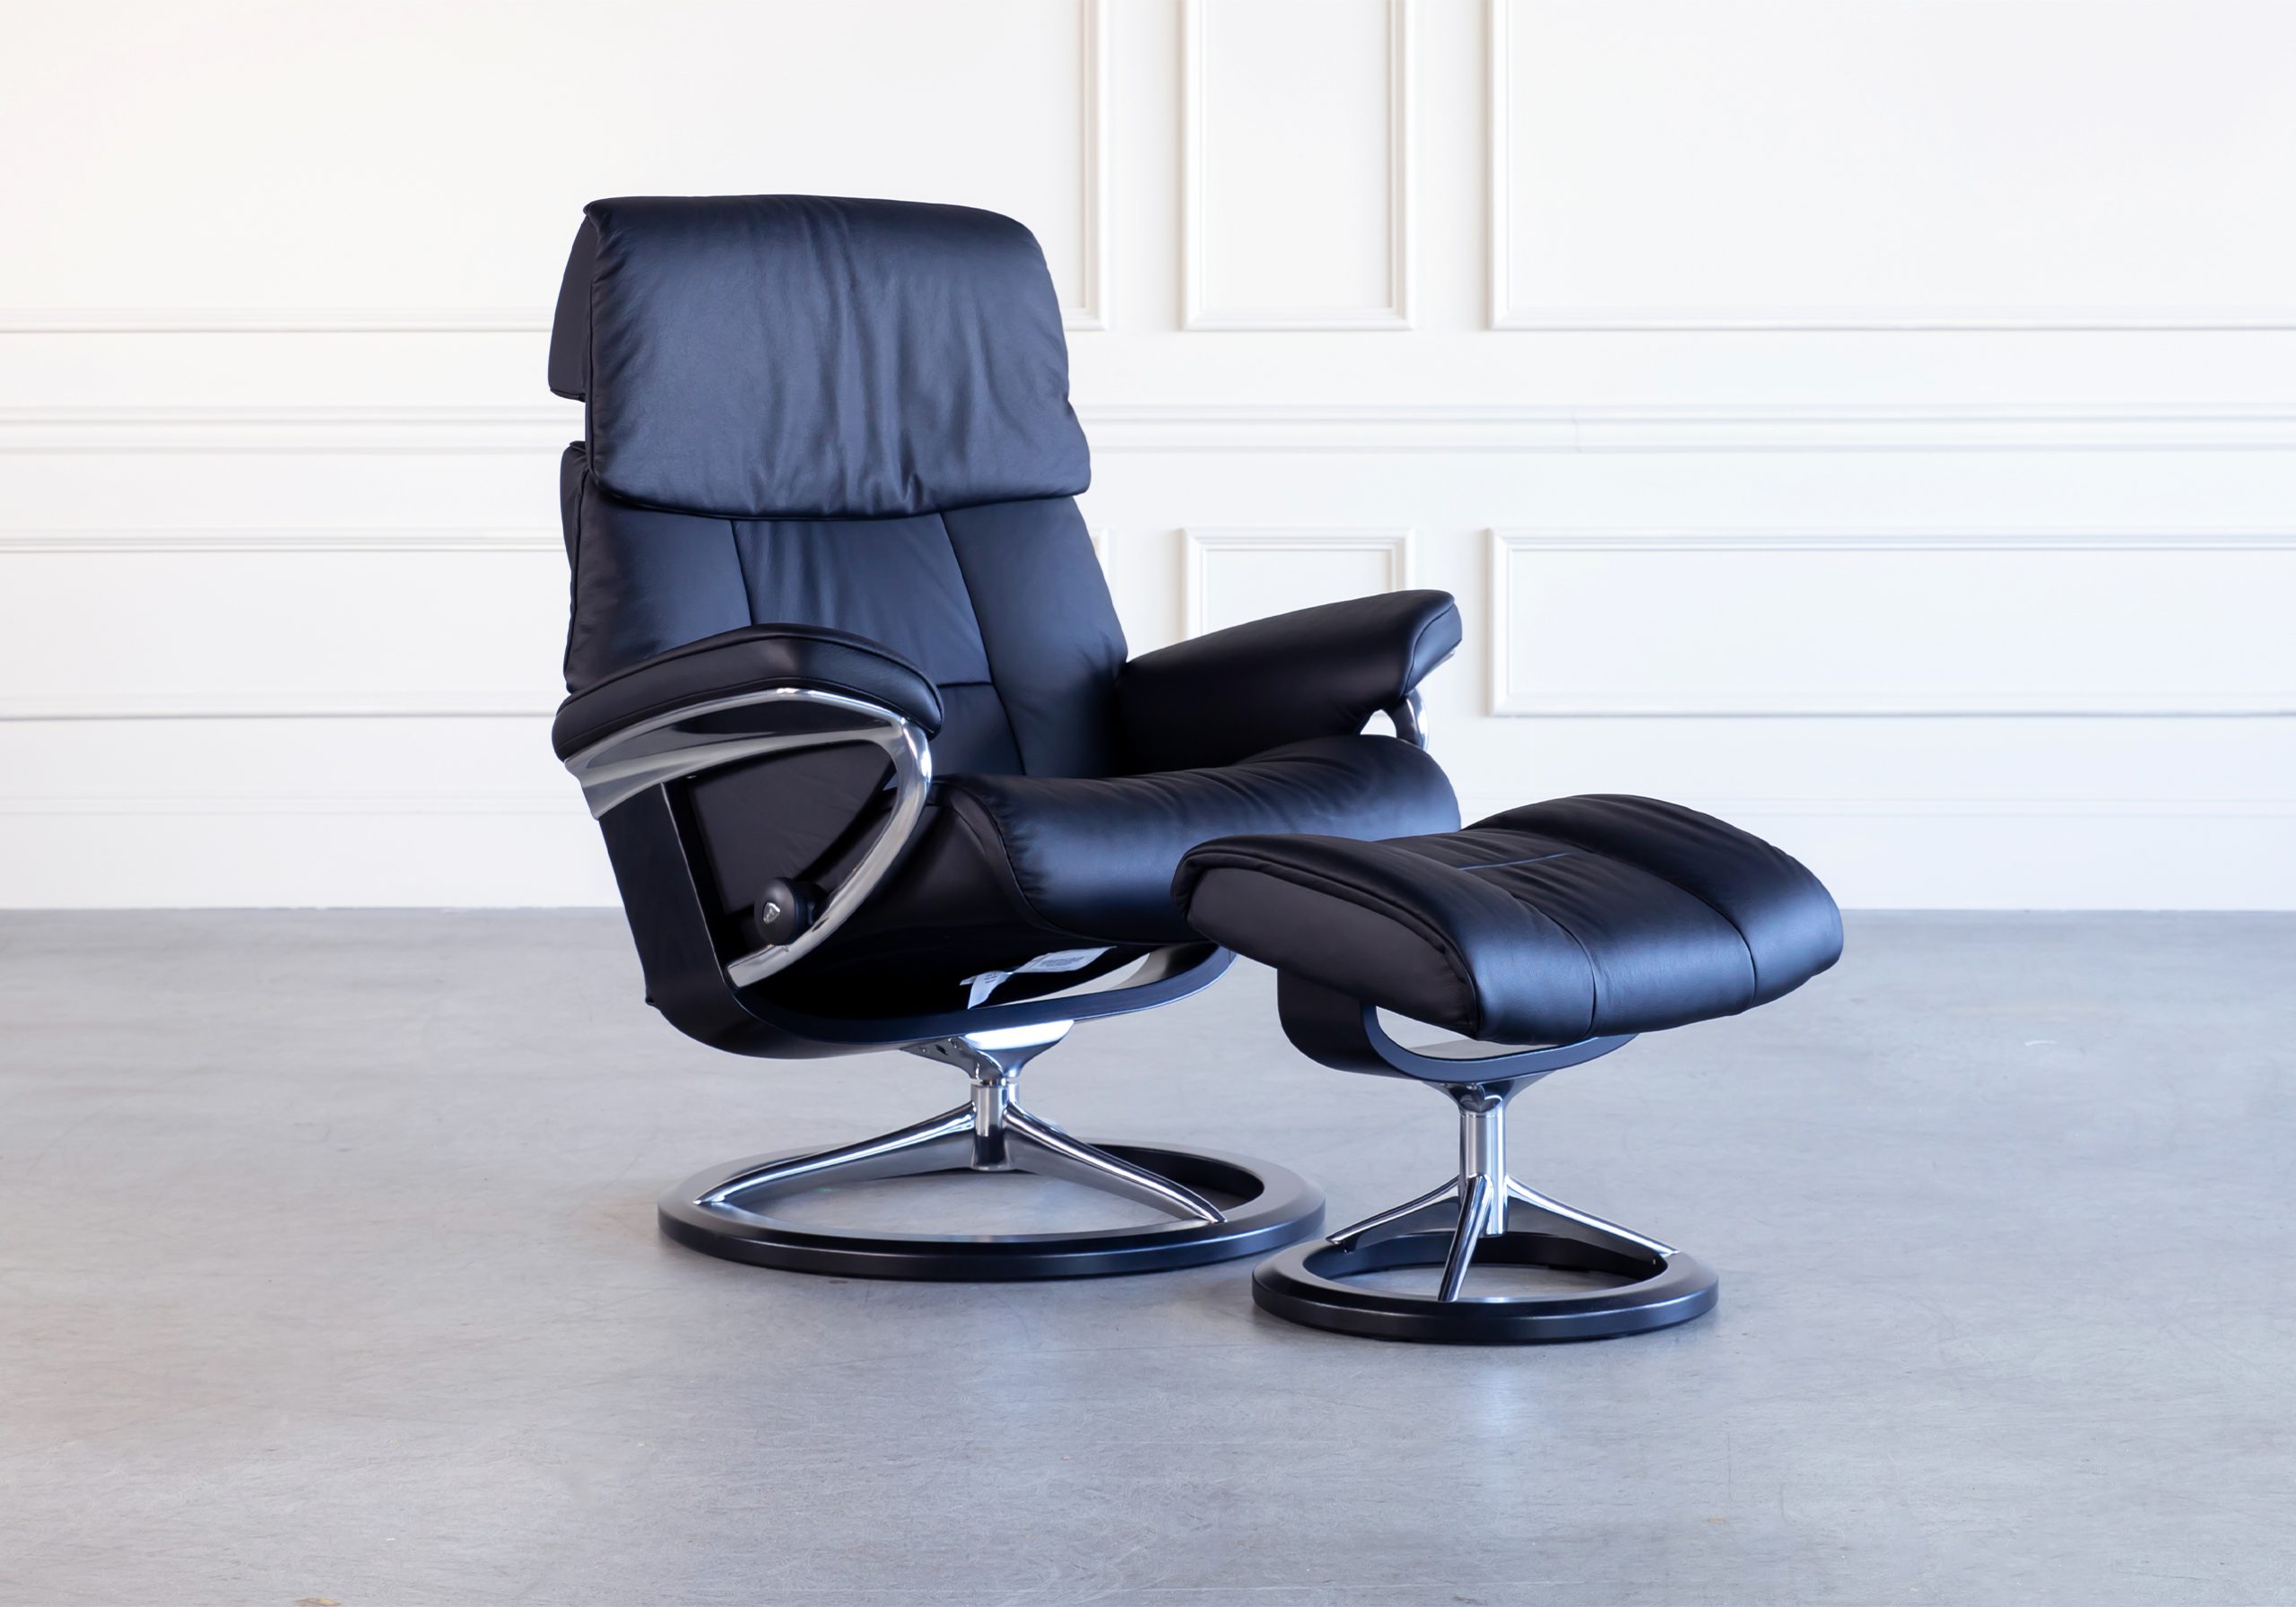 Stressless - Furniture Ruby Signature Recliner ScanDesigns